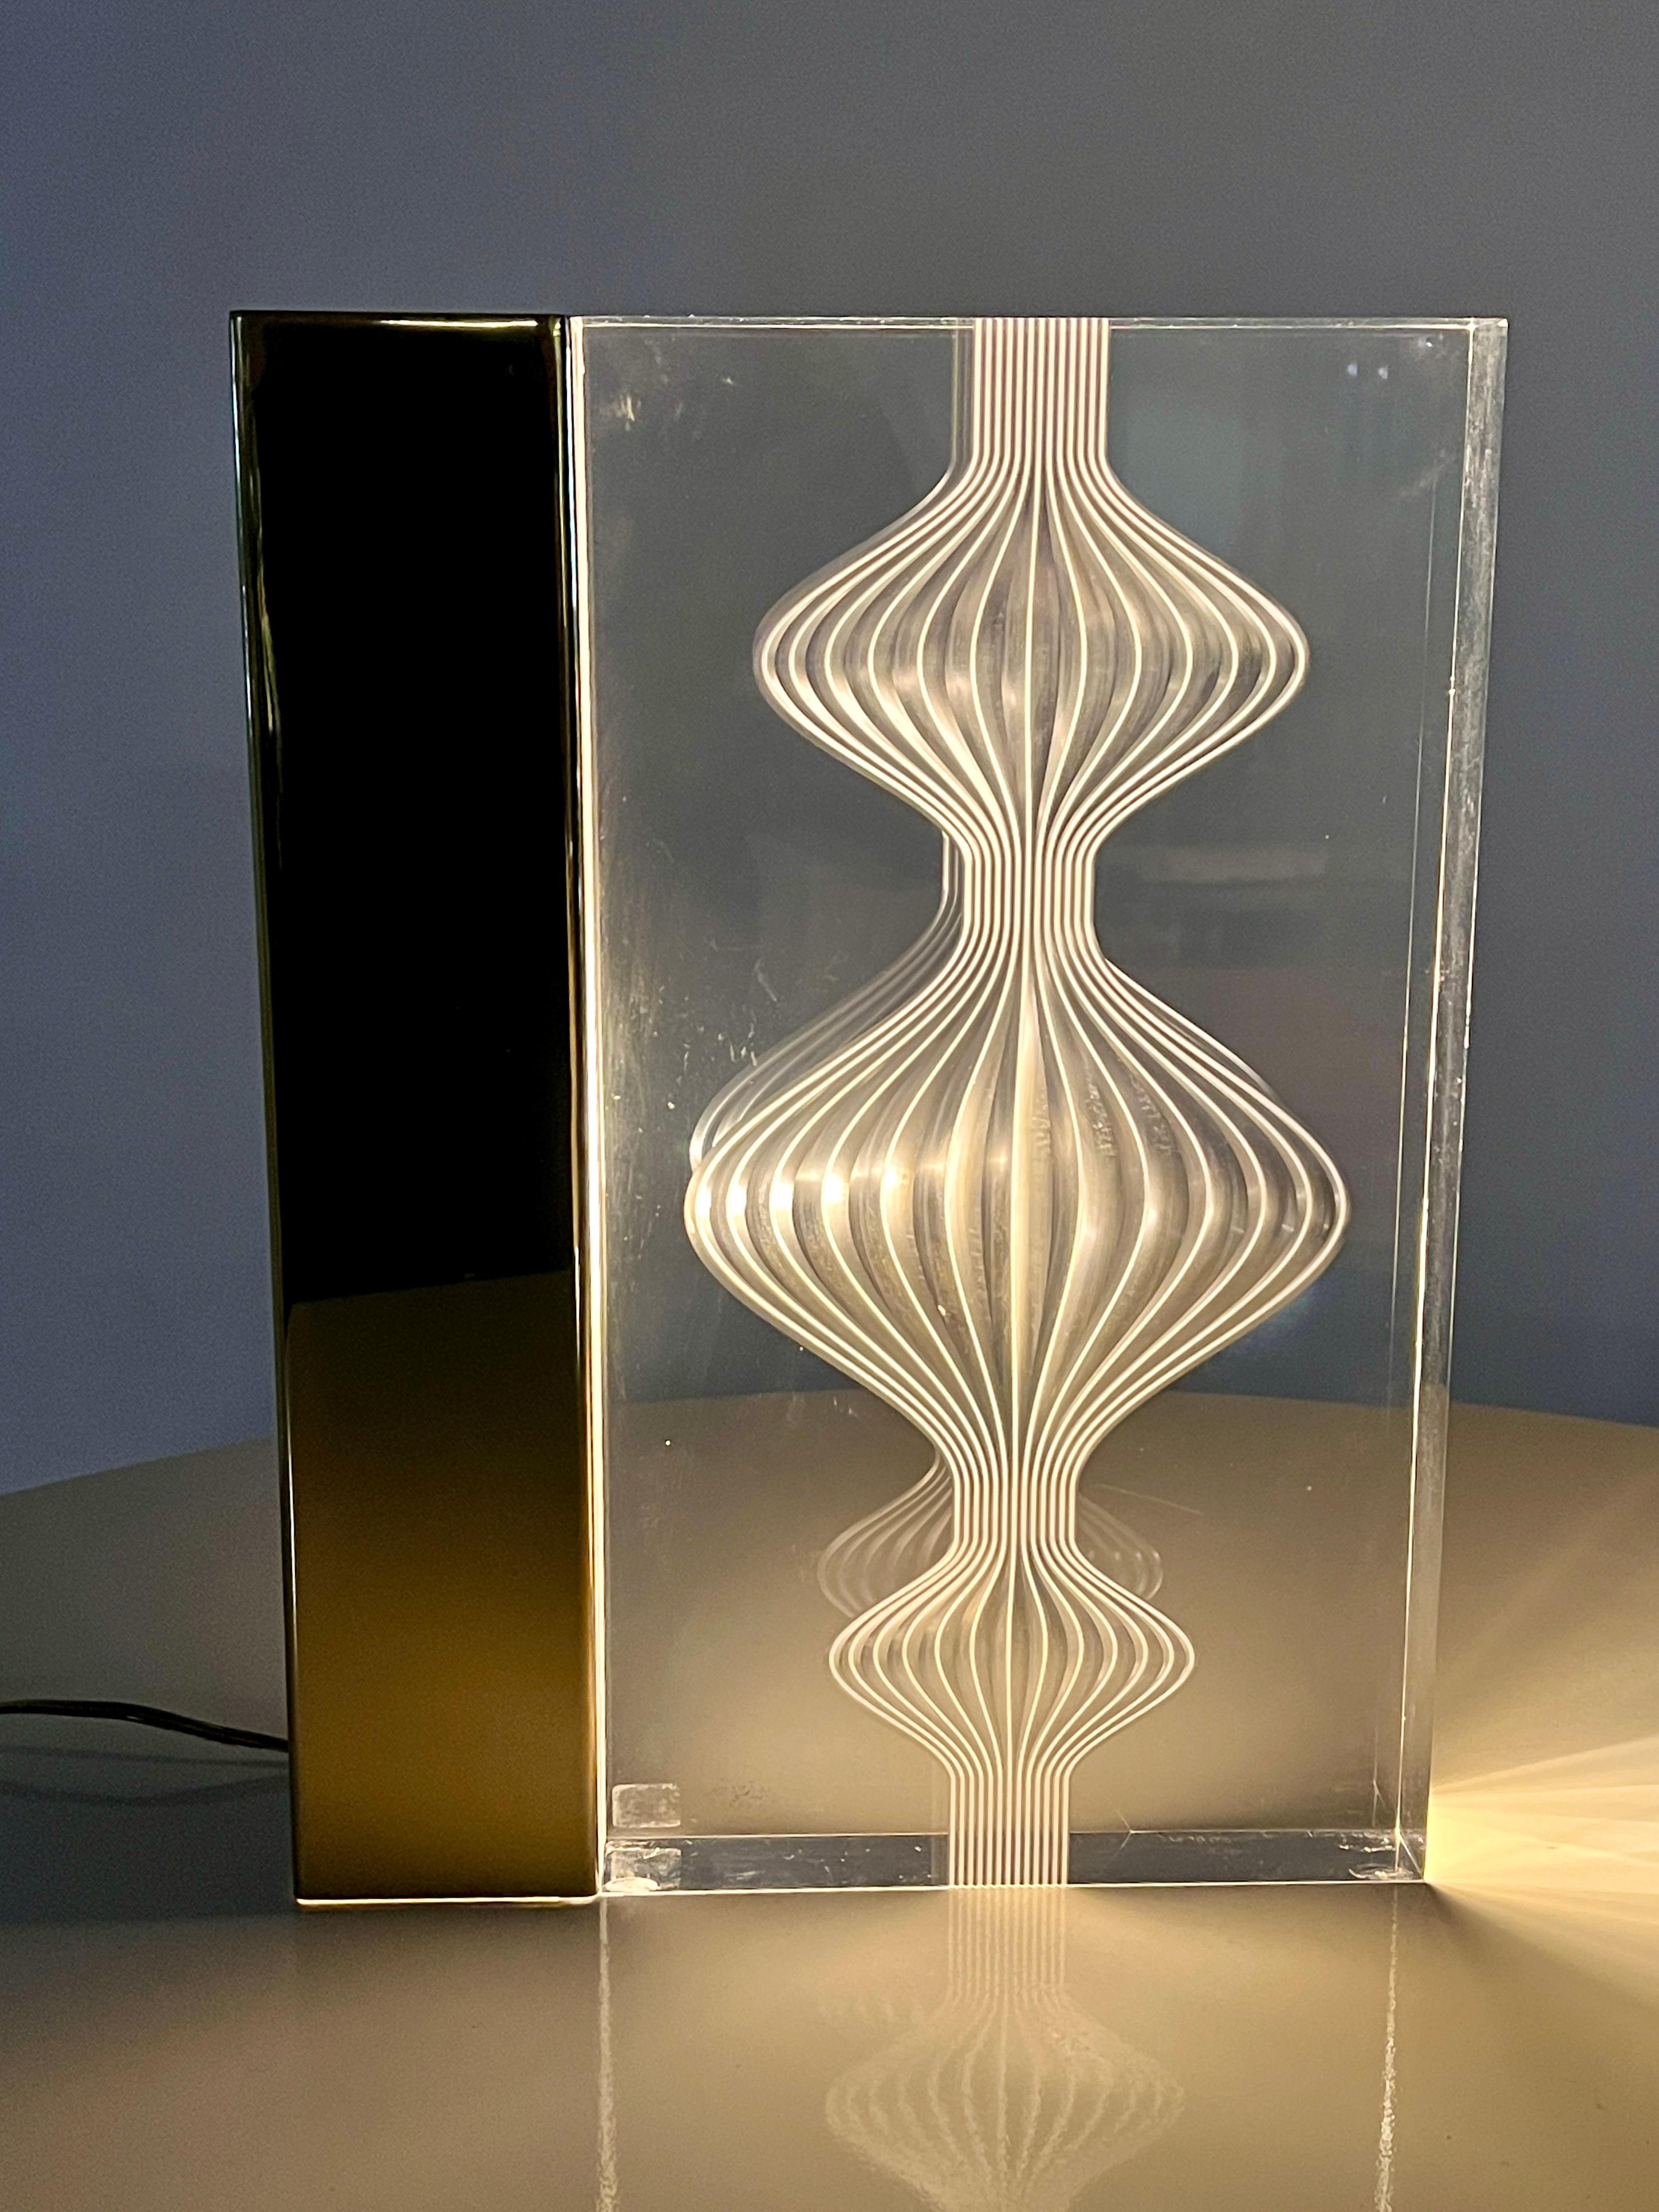 Rare and unique limited edition of a Charles Hollis Jones sculptural Lucite lamp. This high-style carved lucite block is a newer design by the artist Charles and has been modified into a lamp to illuminate the artist's mid-century inspired design